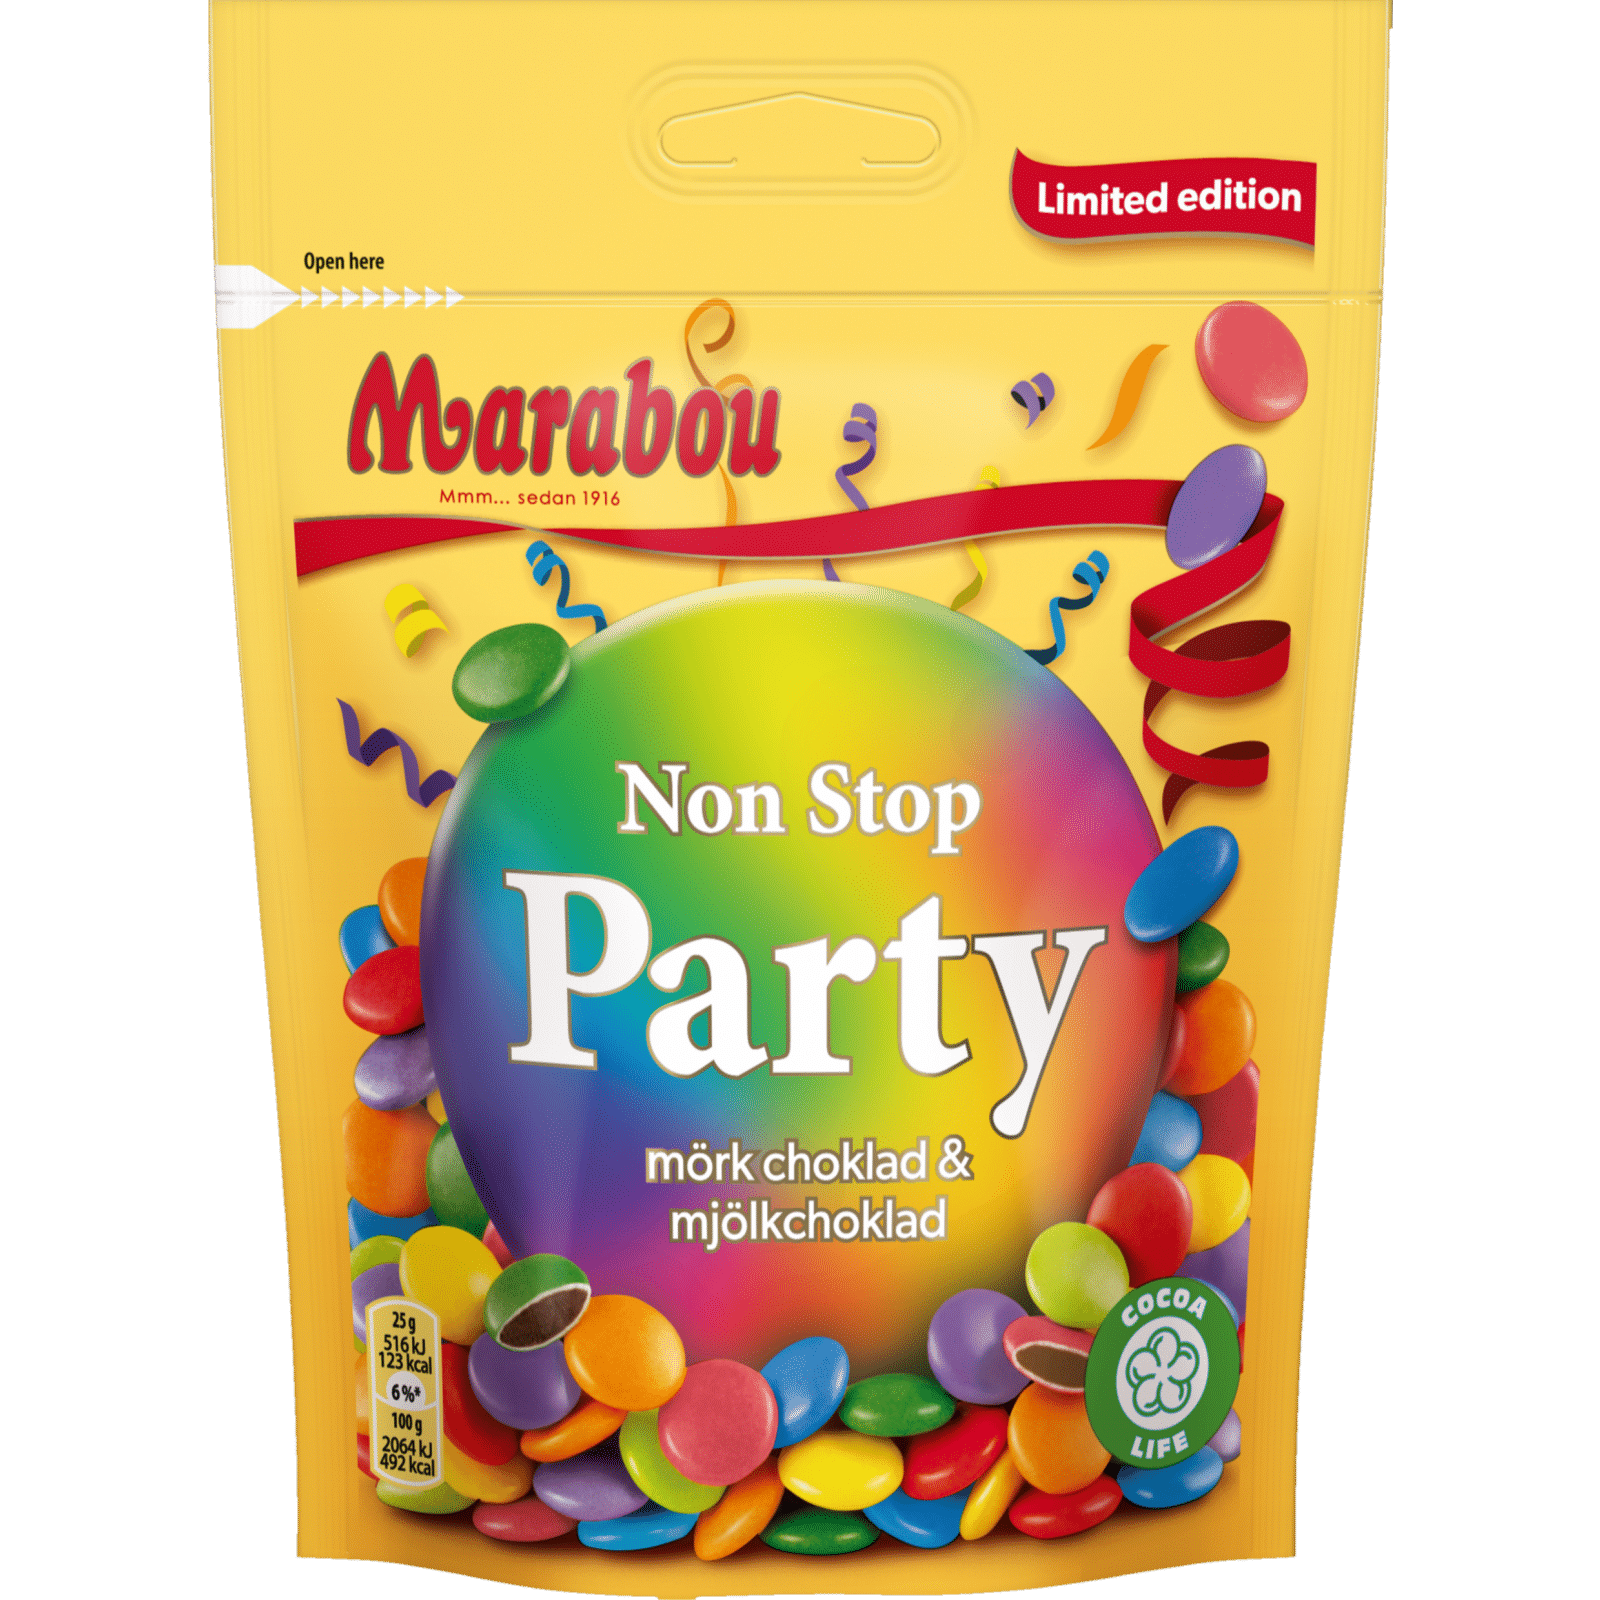 svimmelhed Mary Beskrive Marabou Non stop Party Limited Edition, 225g fra Marabou | Motatos